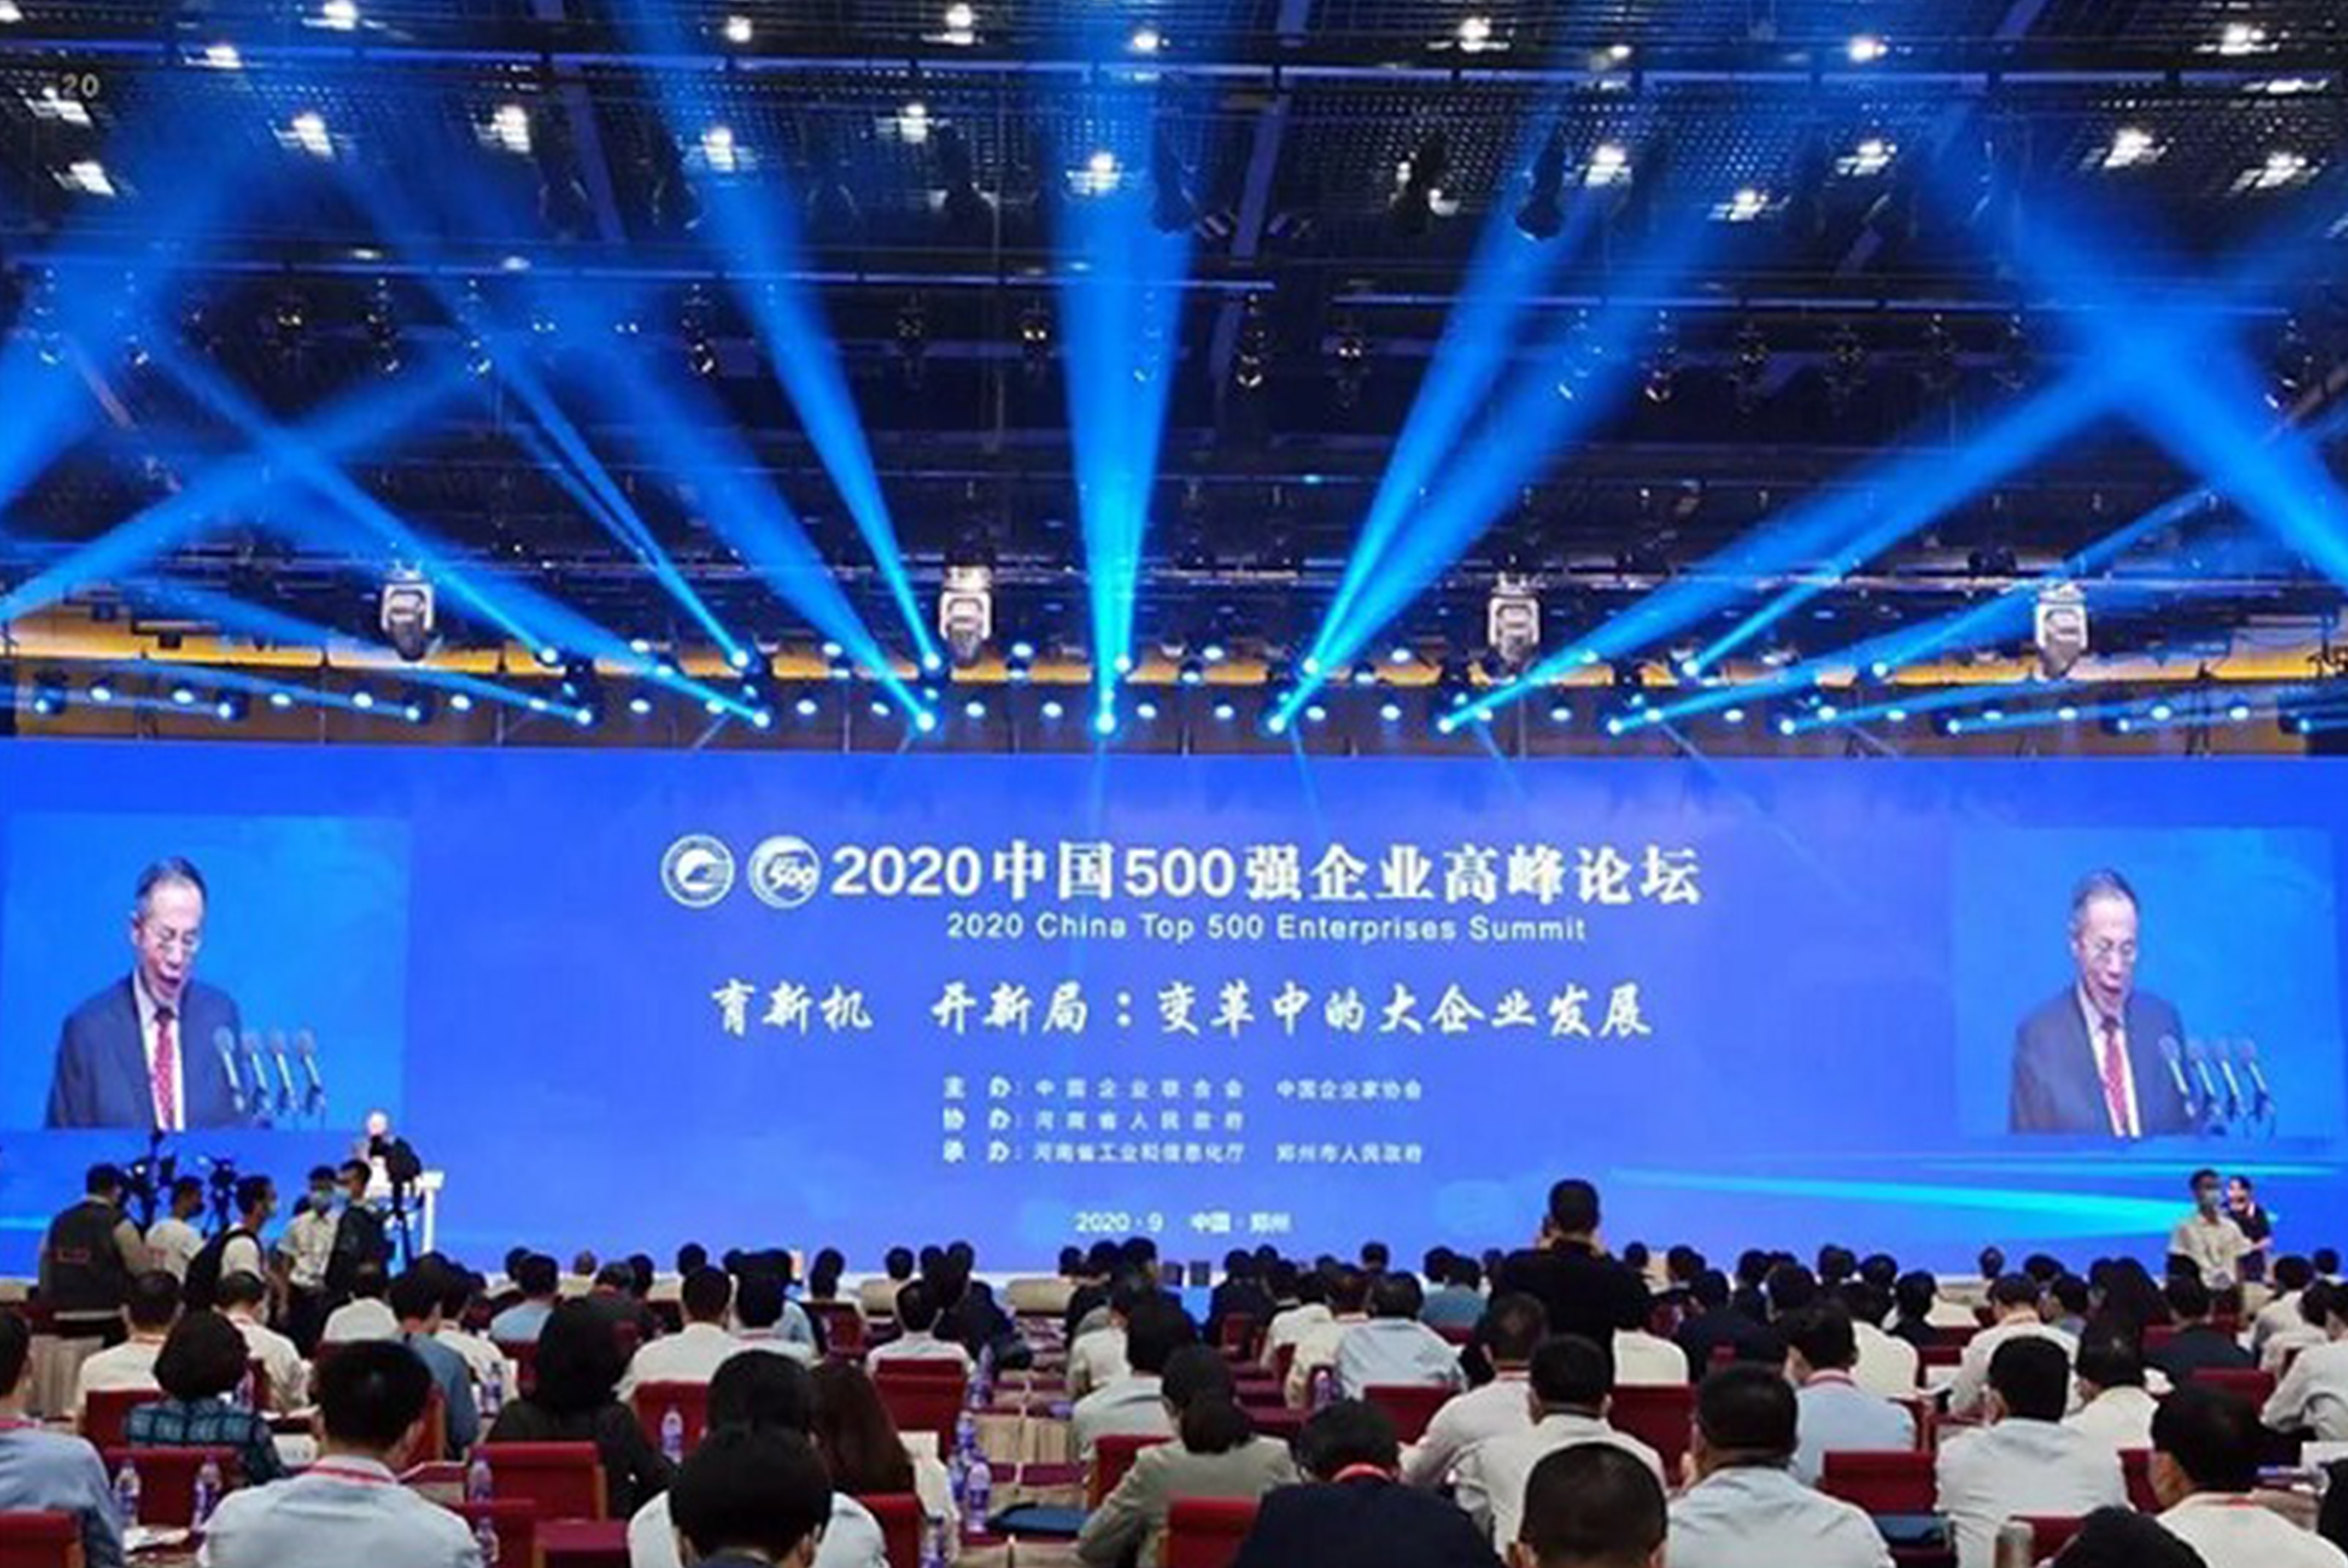 The Group is listed on the 2020 China Top 500 Enterprises